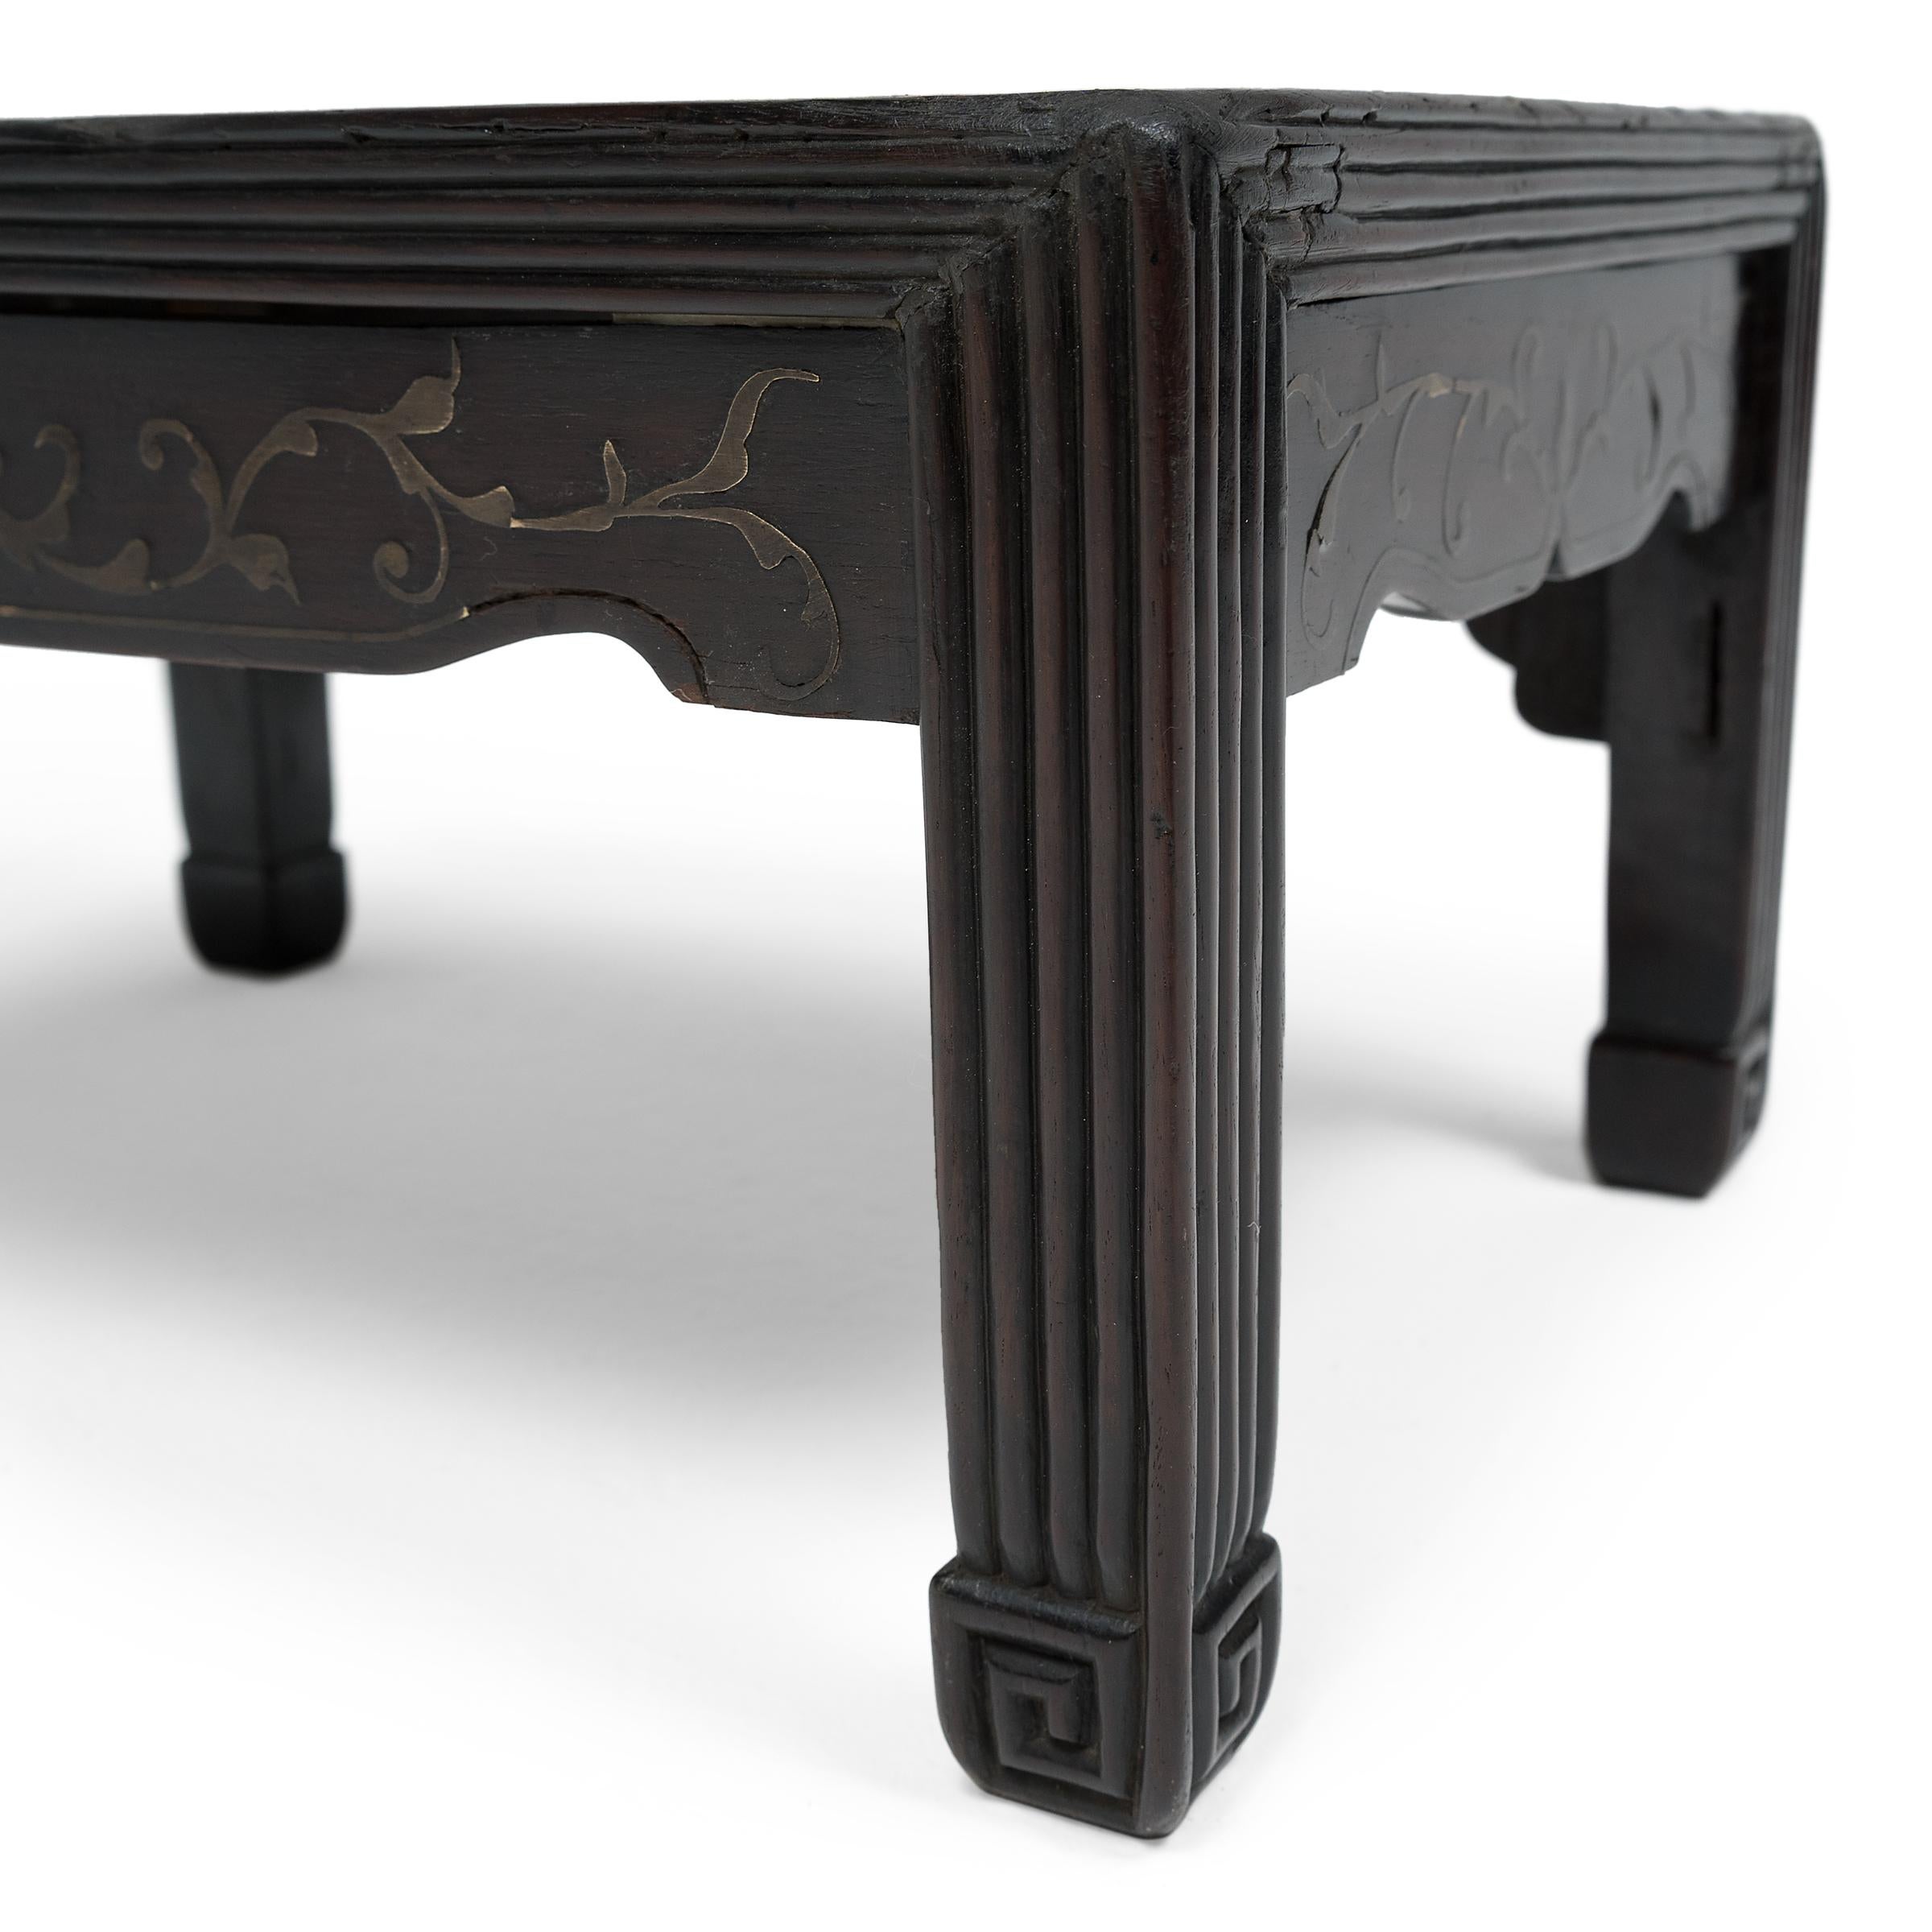 Qing Chinese Kang Table with Ridged Legs, c. 1800 For Sale